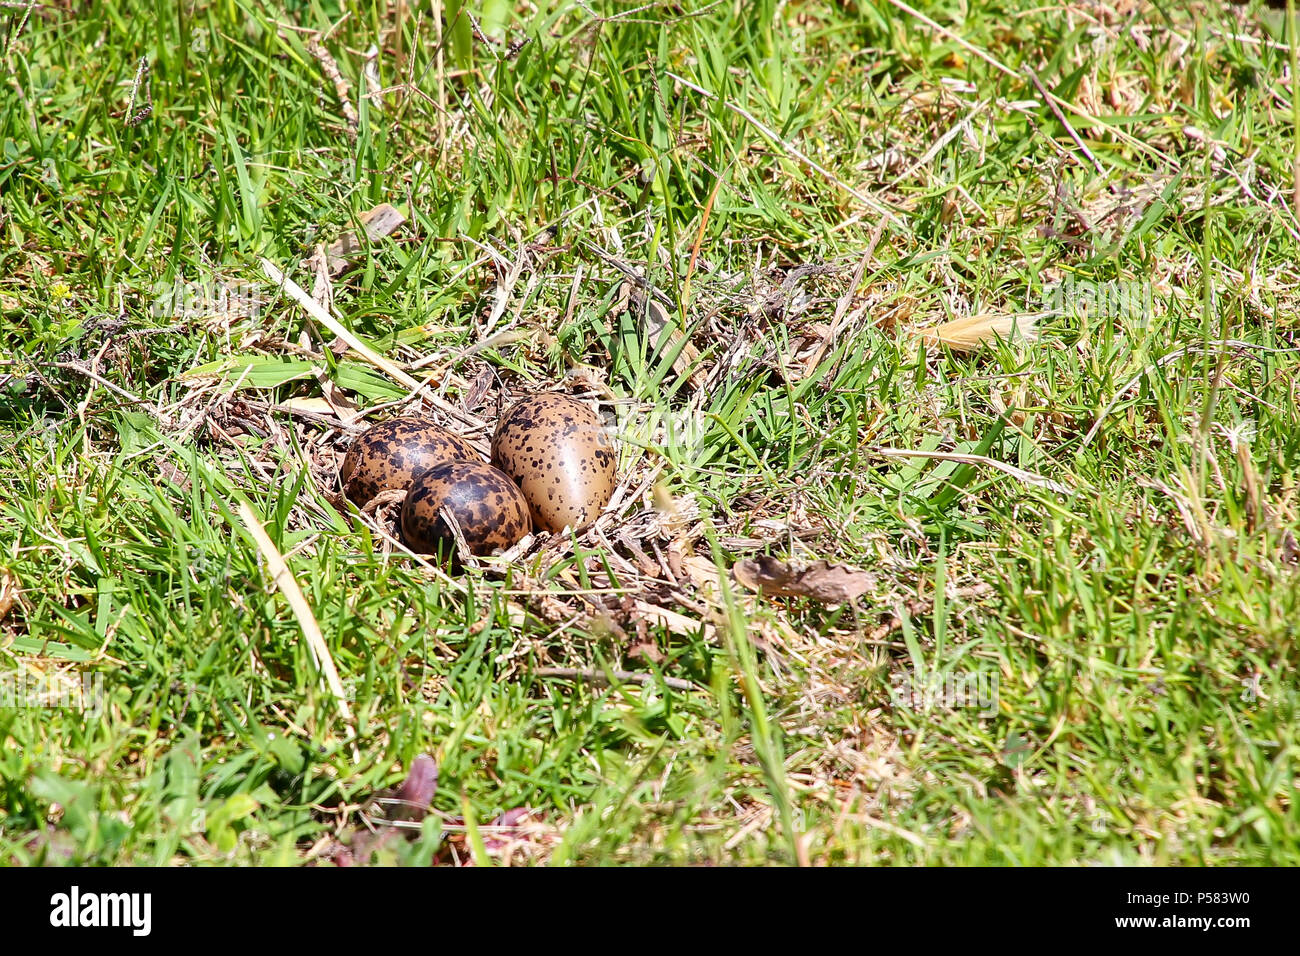 Clutch of eggs of Southern Lapwing (Vanellus chilensis) on the bank of Plate River in Montevideo, Uruguay. This bird is the national bird of Uruguay. Stock Photo